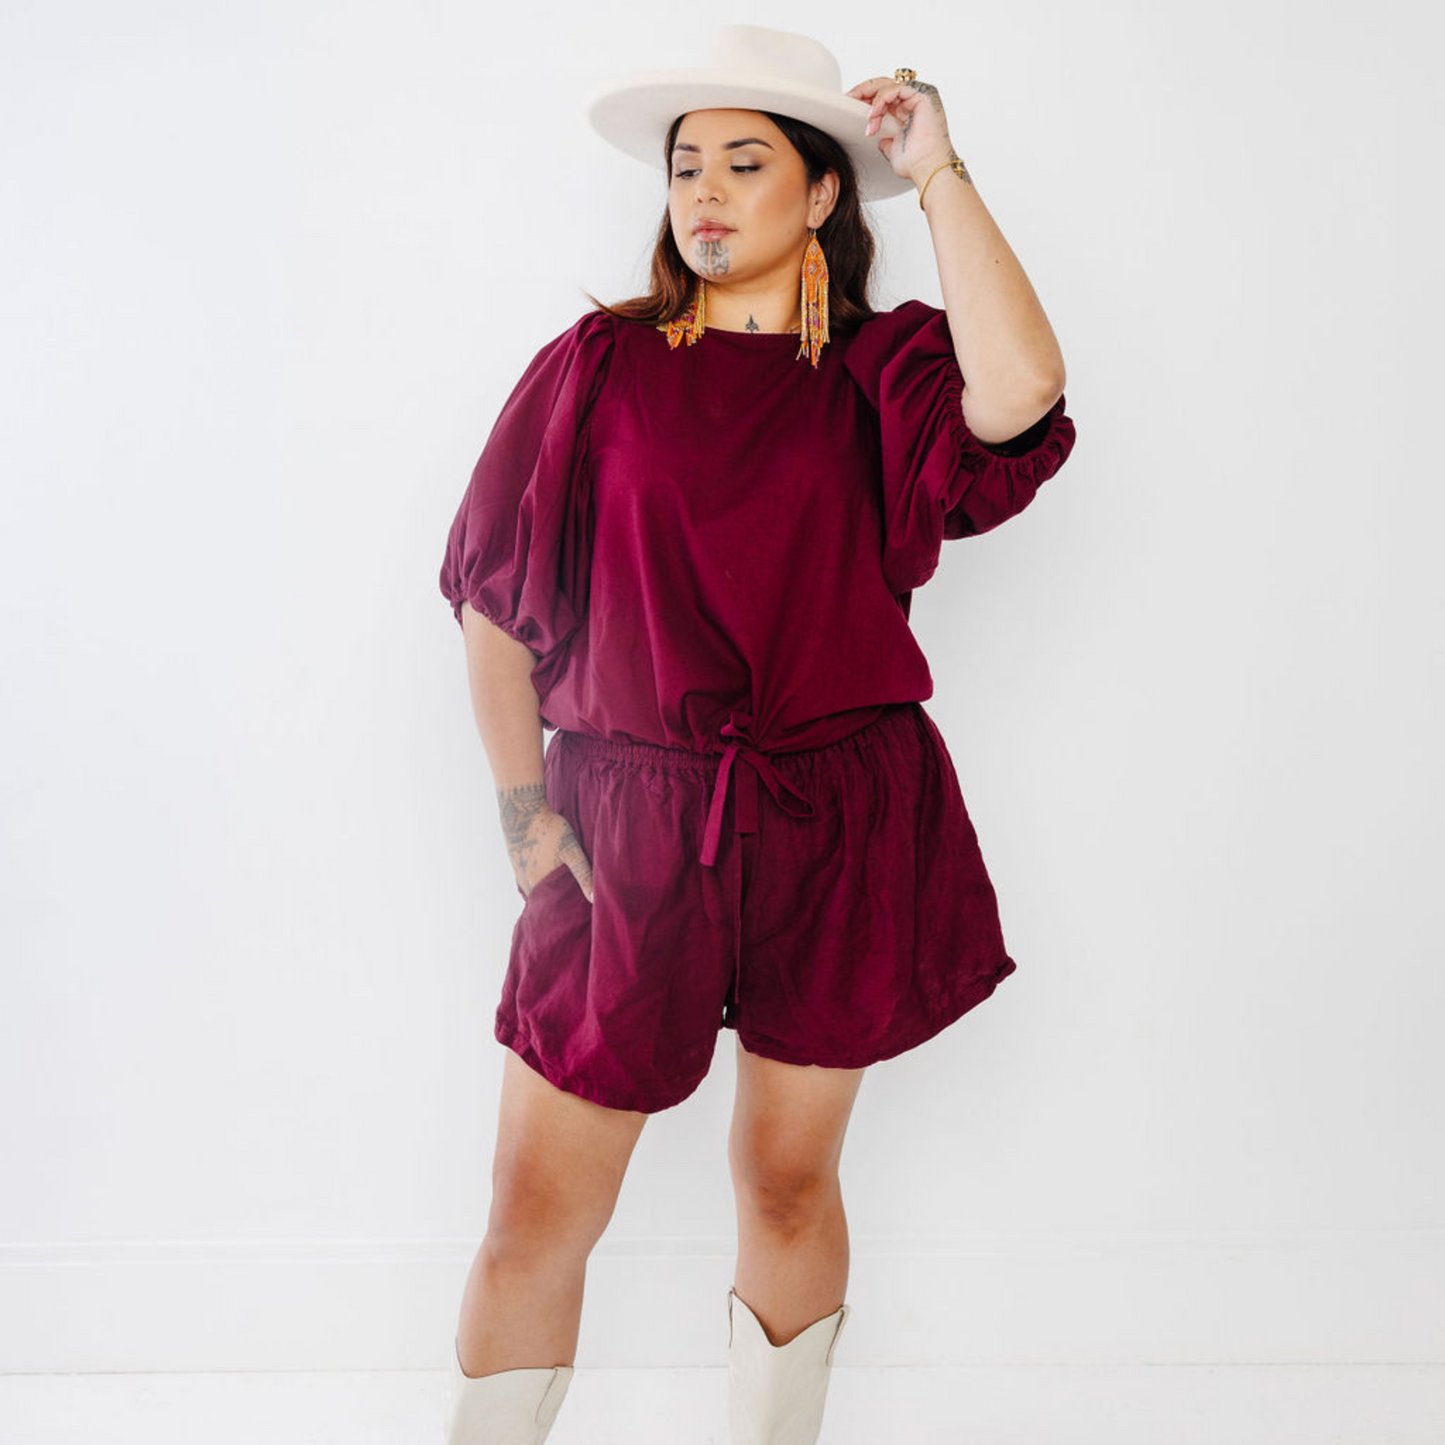 Jonique Oli, founder of Waiapu Road, wearing the Kapua Shorts - Plum - matched with a white hat and white boots